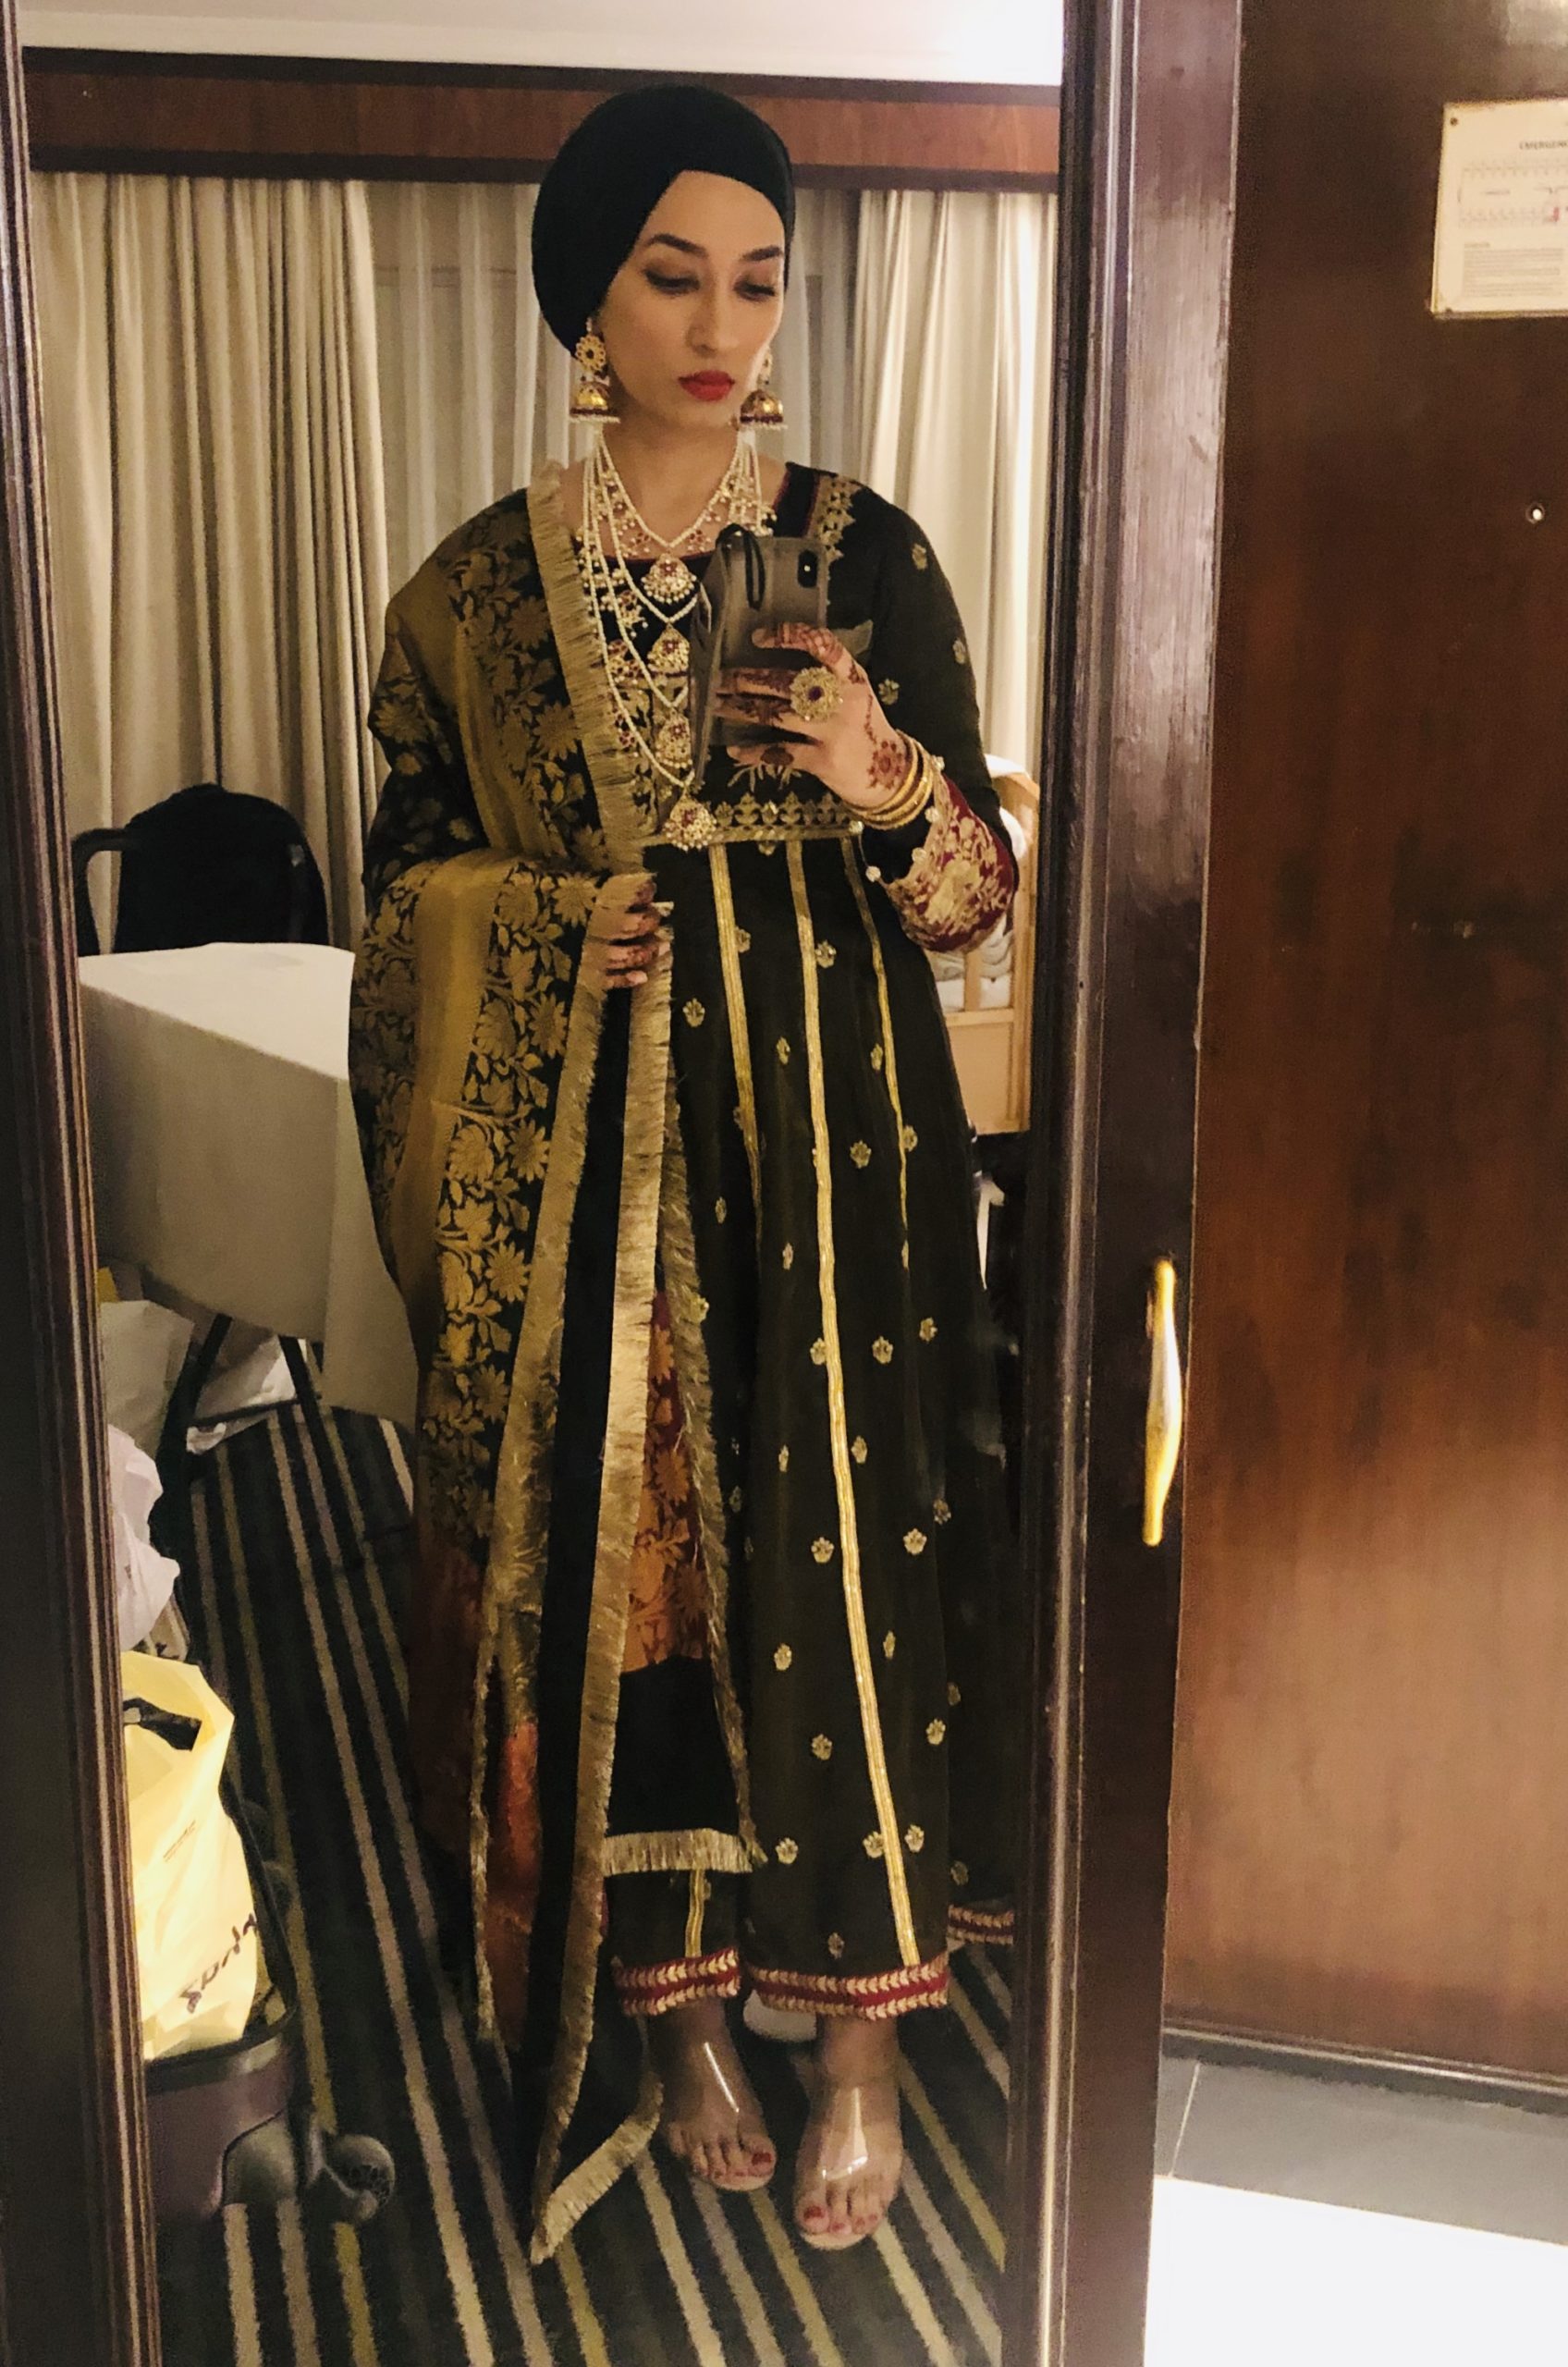 Mirror selfie. Saba Ali gazes at self through phone camera, dressed in extremely elegant formal wear. She wears a long black abaya with intricate gold embroidery and a black headwrap. She wears many gold necklances, large gold earrings, shoes made from clear plastic, and her hands are decorated with Henna. She appears to be in a hotel room.